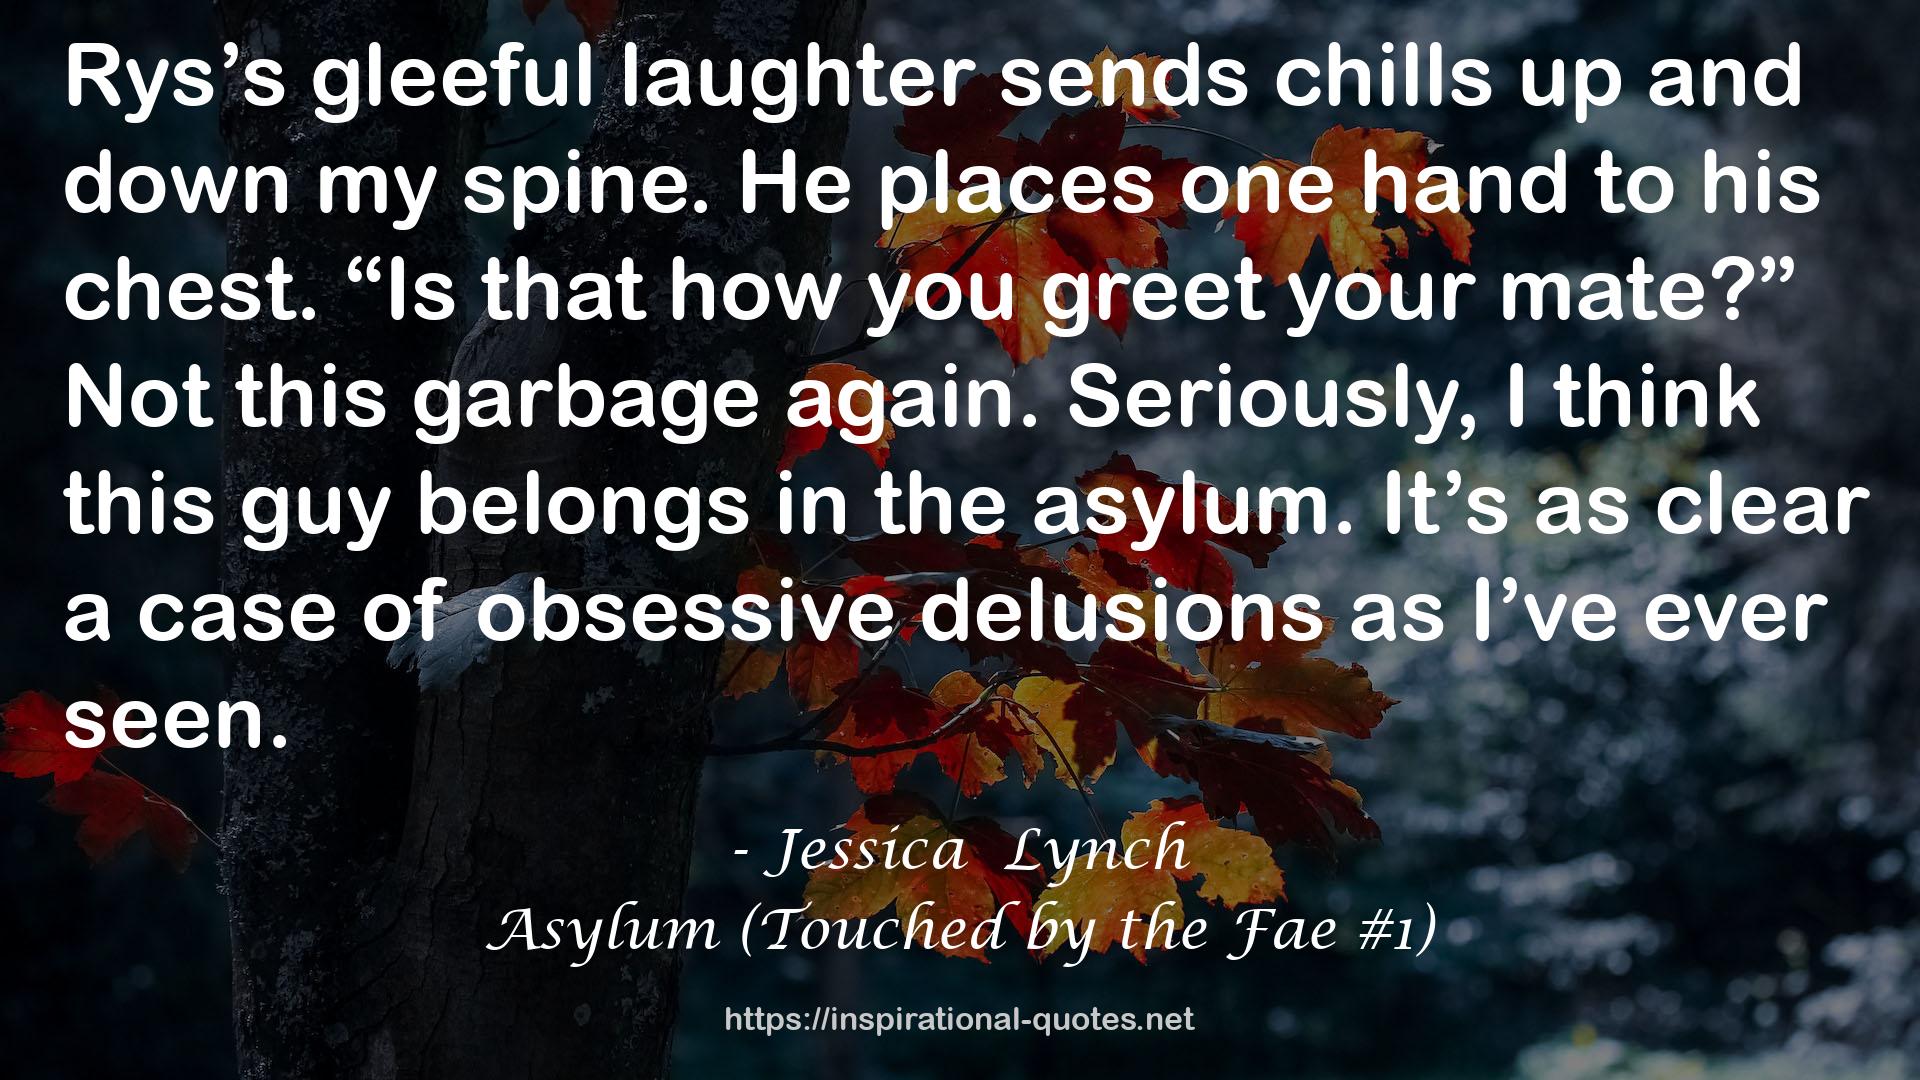 Asylum (Touched by the Fae #1) QUOTES